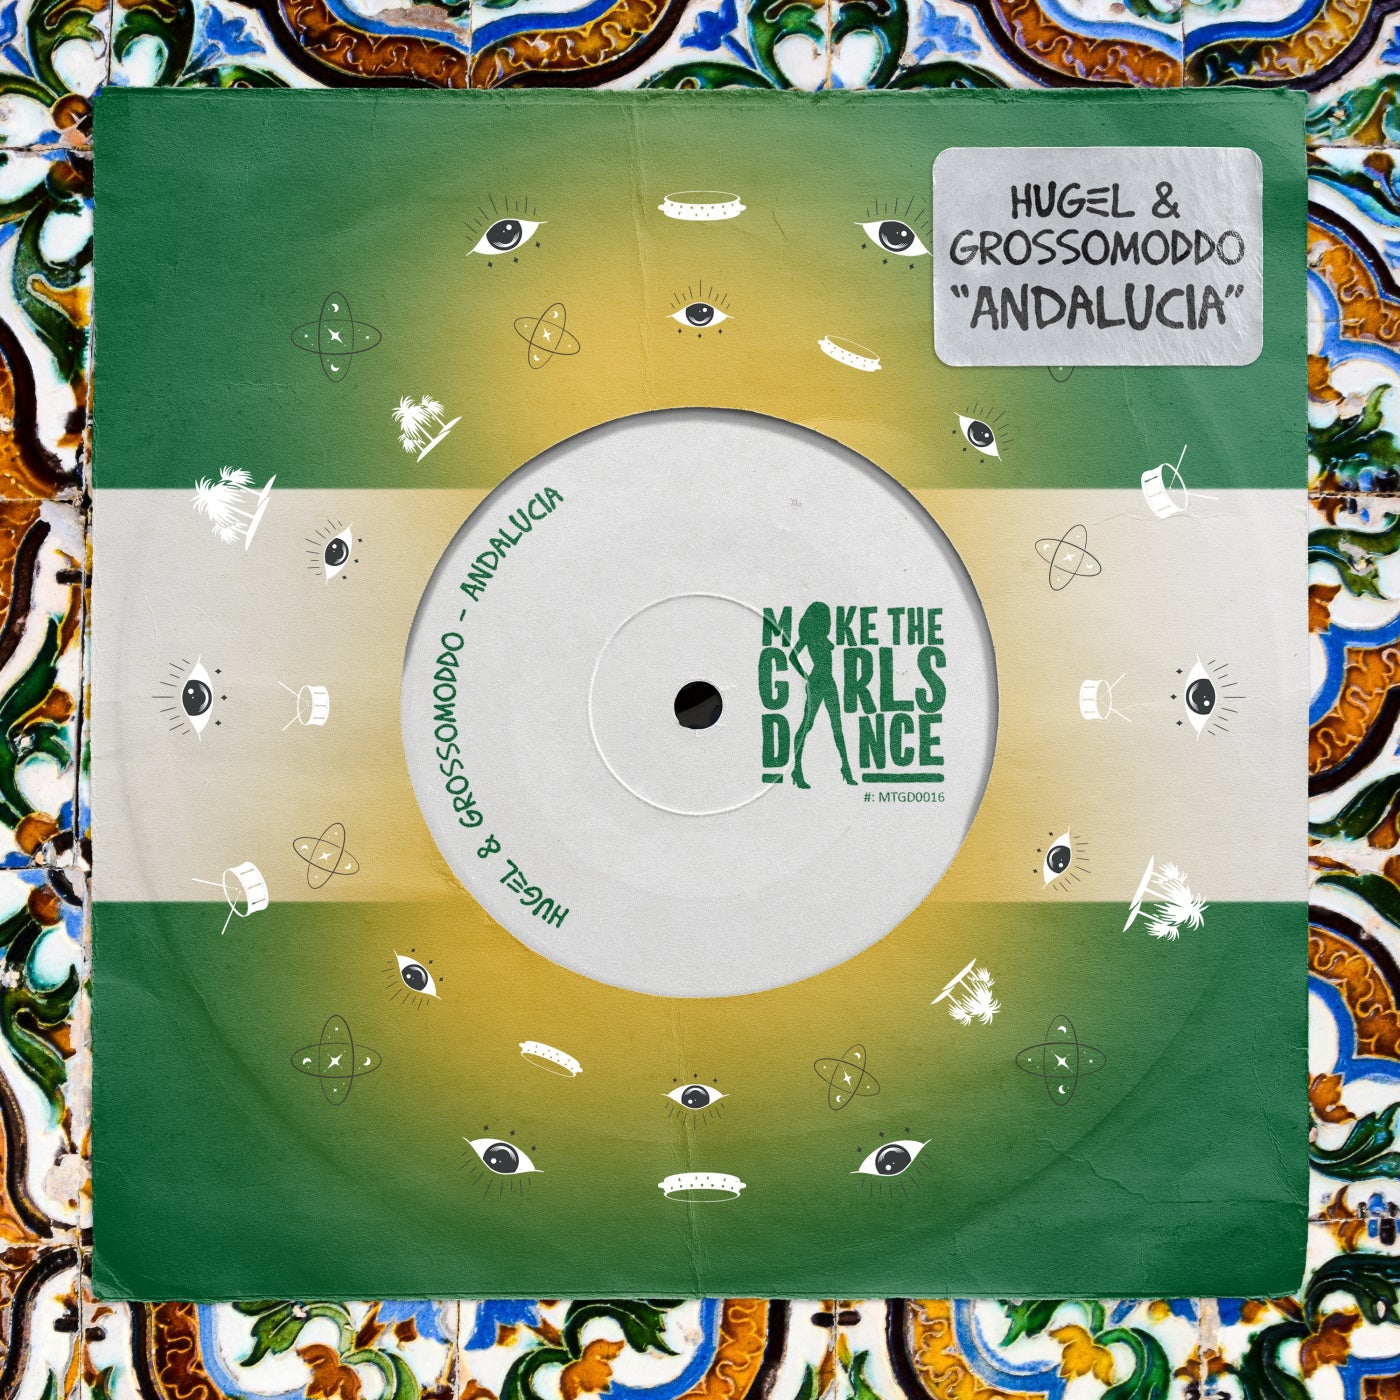 image cover: Hugel, GROSSOMODDO - Andalucia (Extended Mix) on Make The Girls Dance Records